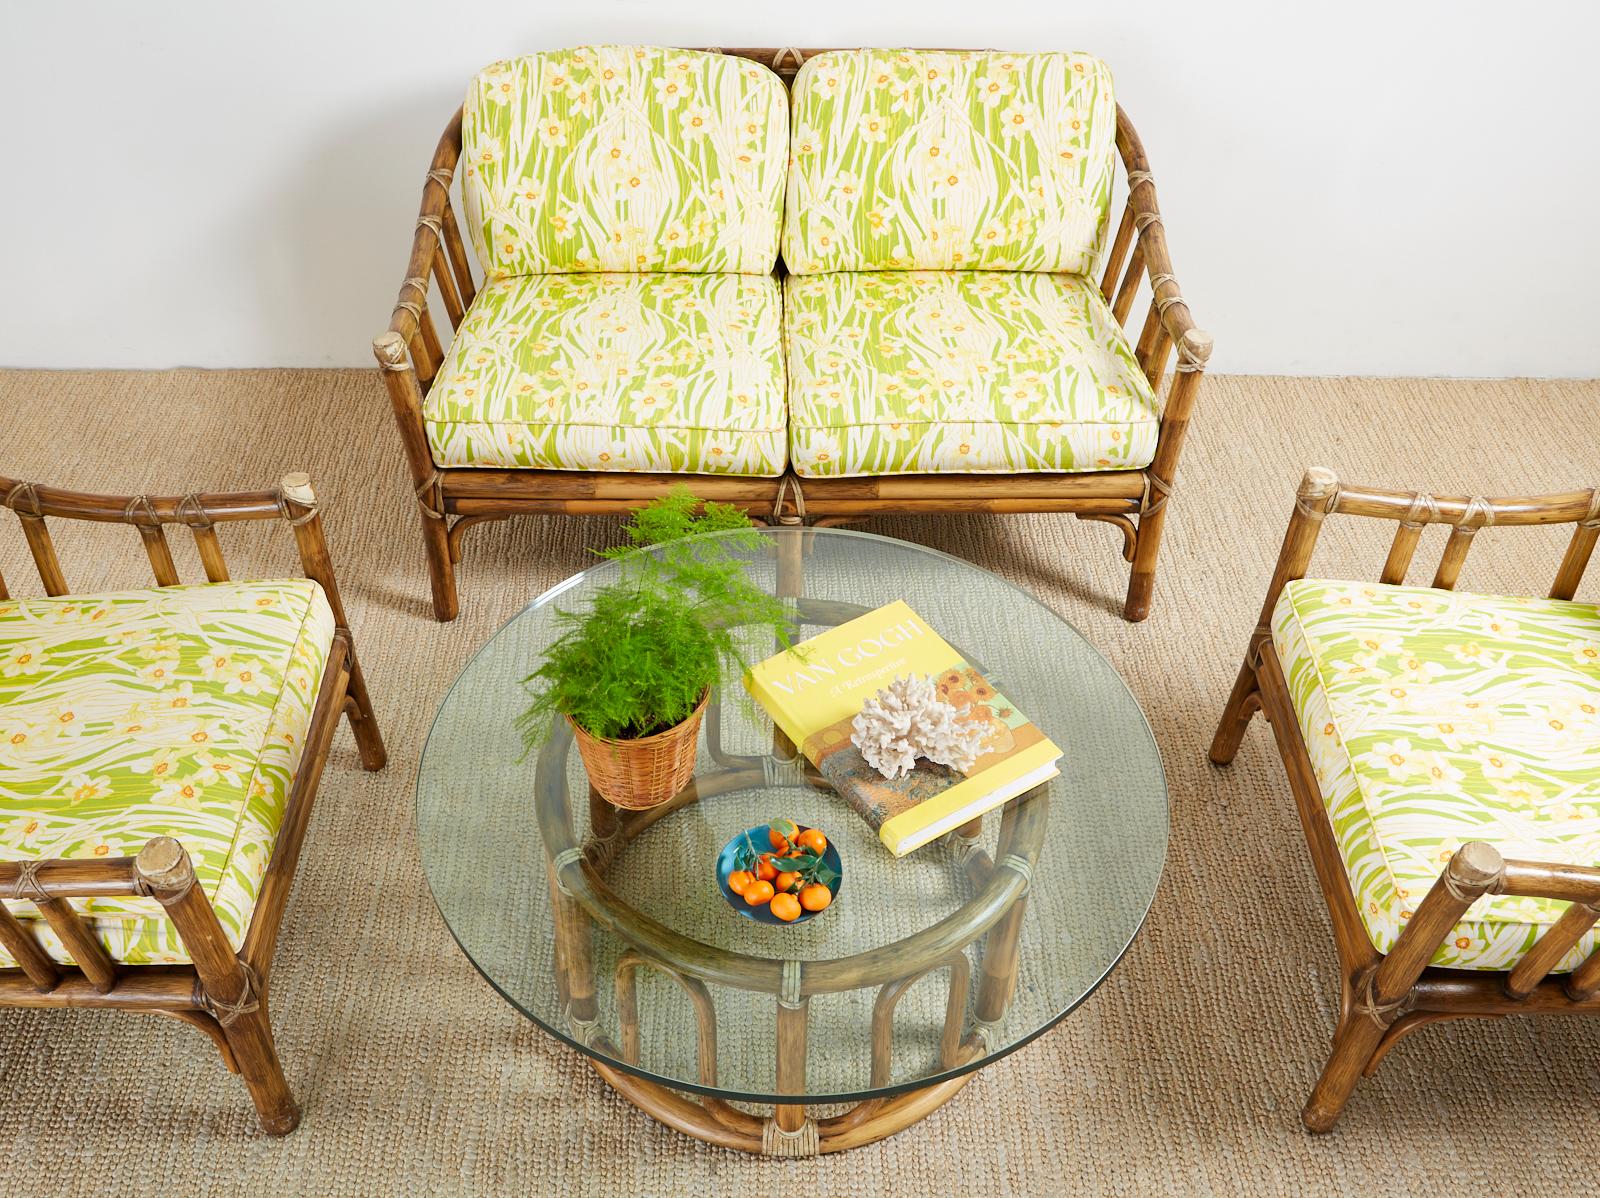 California organic modern style living room suite by McGuire. Set consists of a settee, two lounge chairs, and a round coffee cocktail table. Made from rattan poles lashed together with leather rawhide laces. Topped with bright floral motif seat